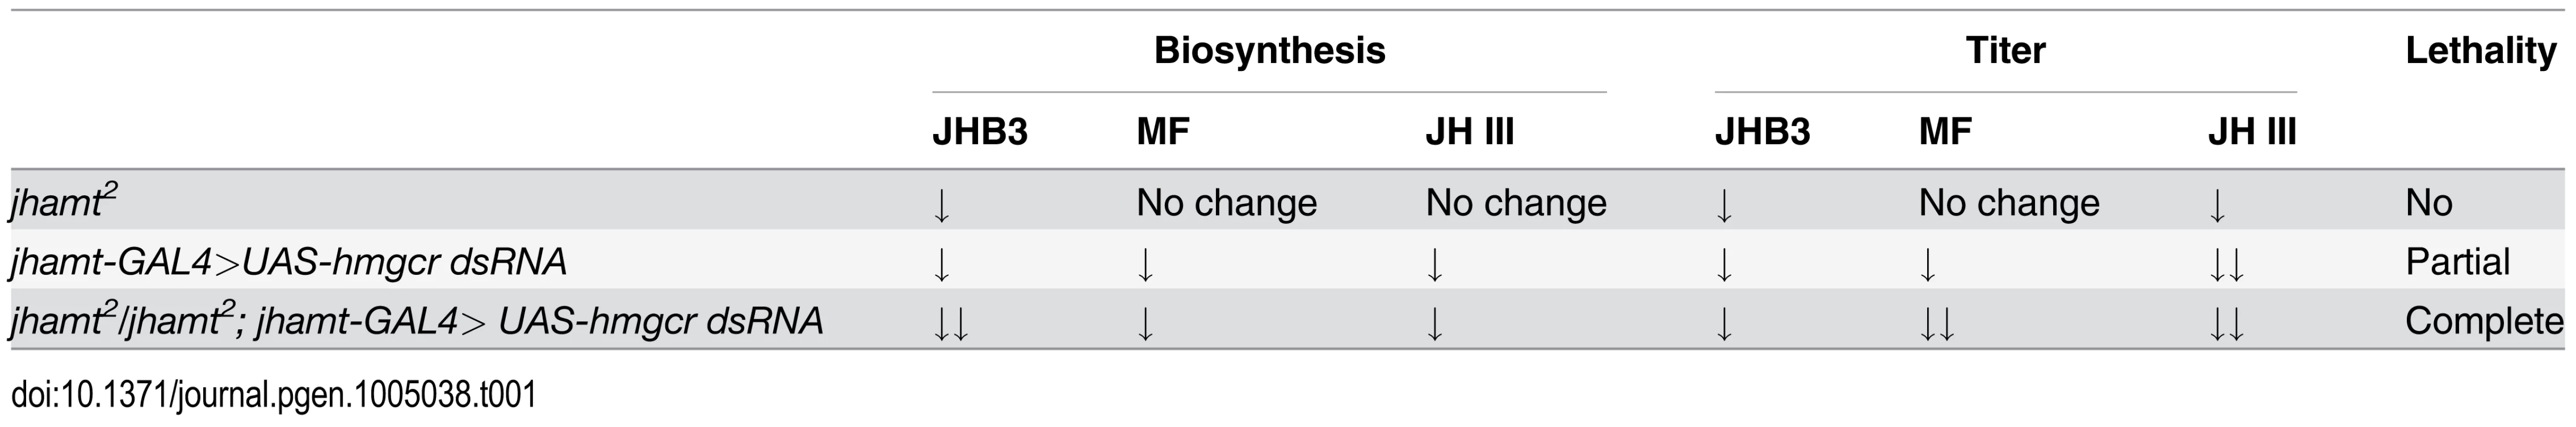 Comparisons of JH biosynthesis, JH titer, and lethality among three genotypes.